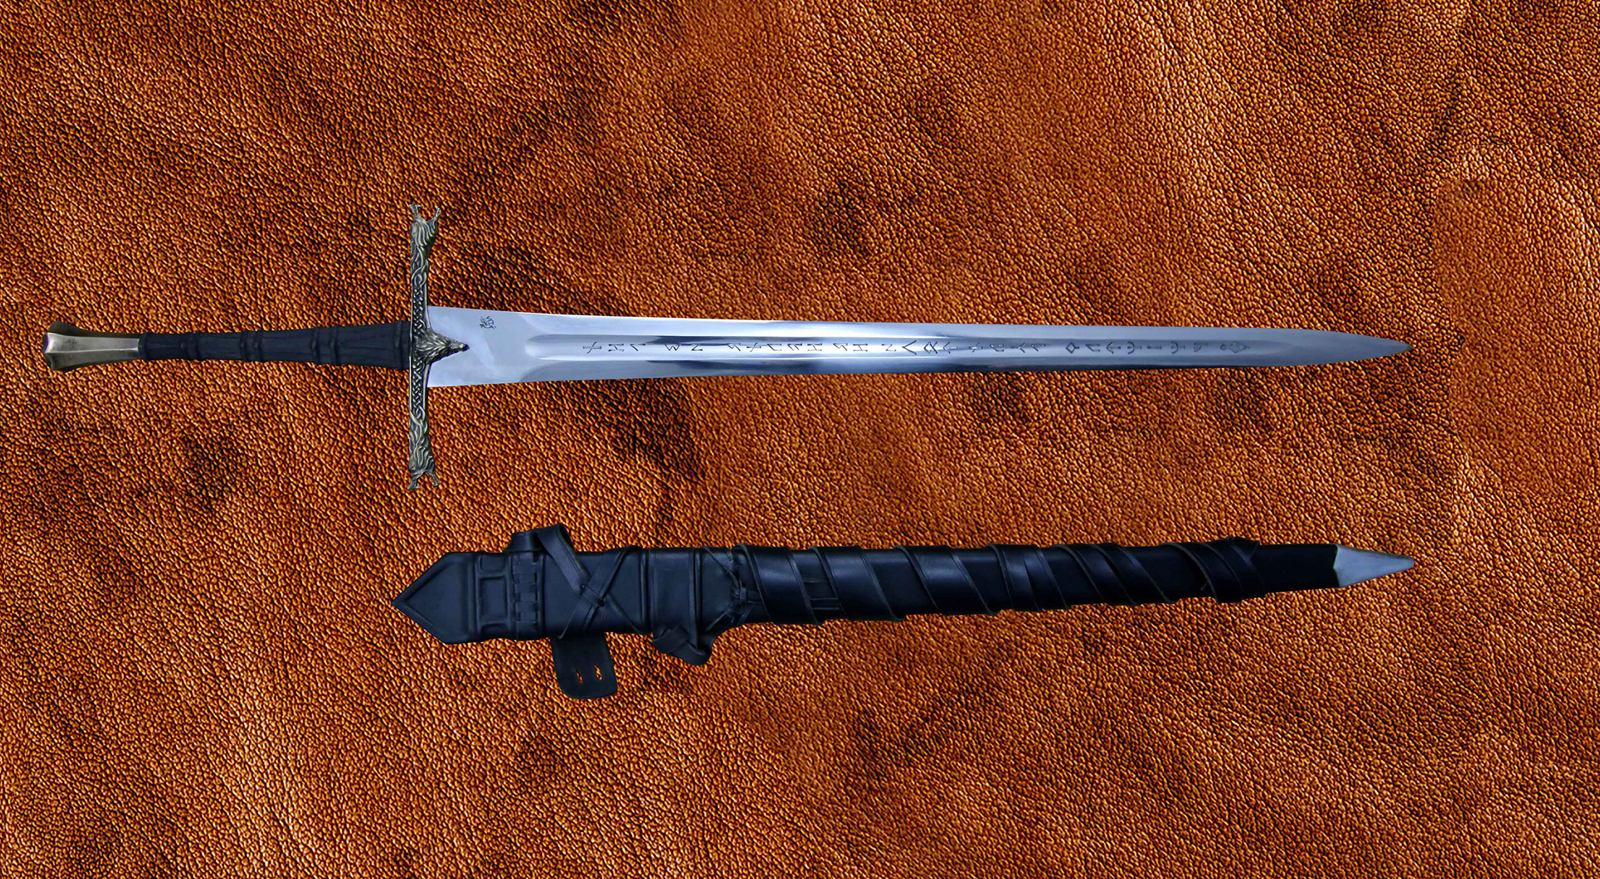 The Eindride Lone Wolf Medieval Sword